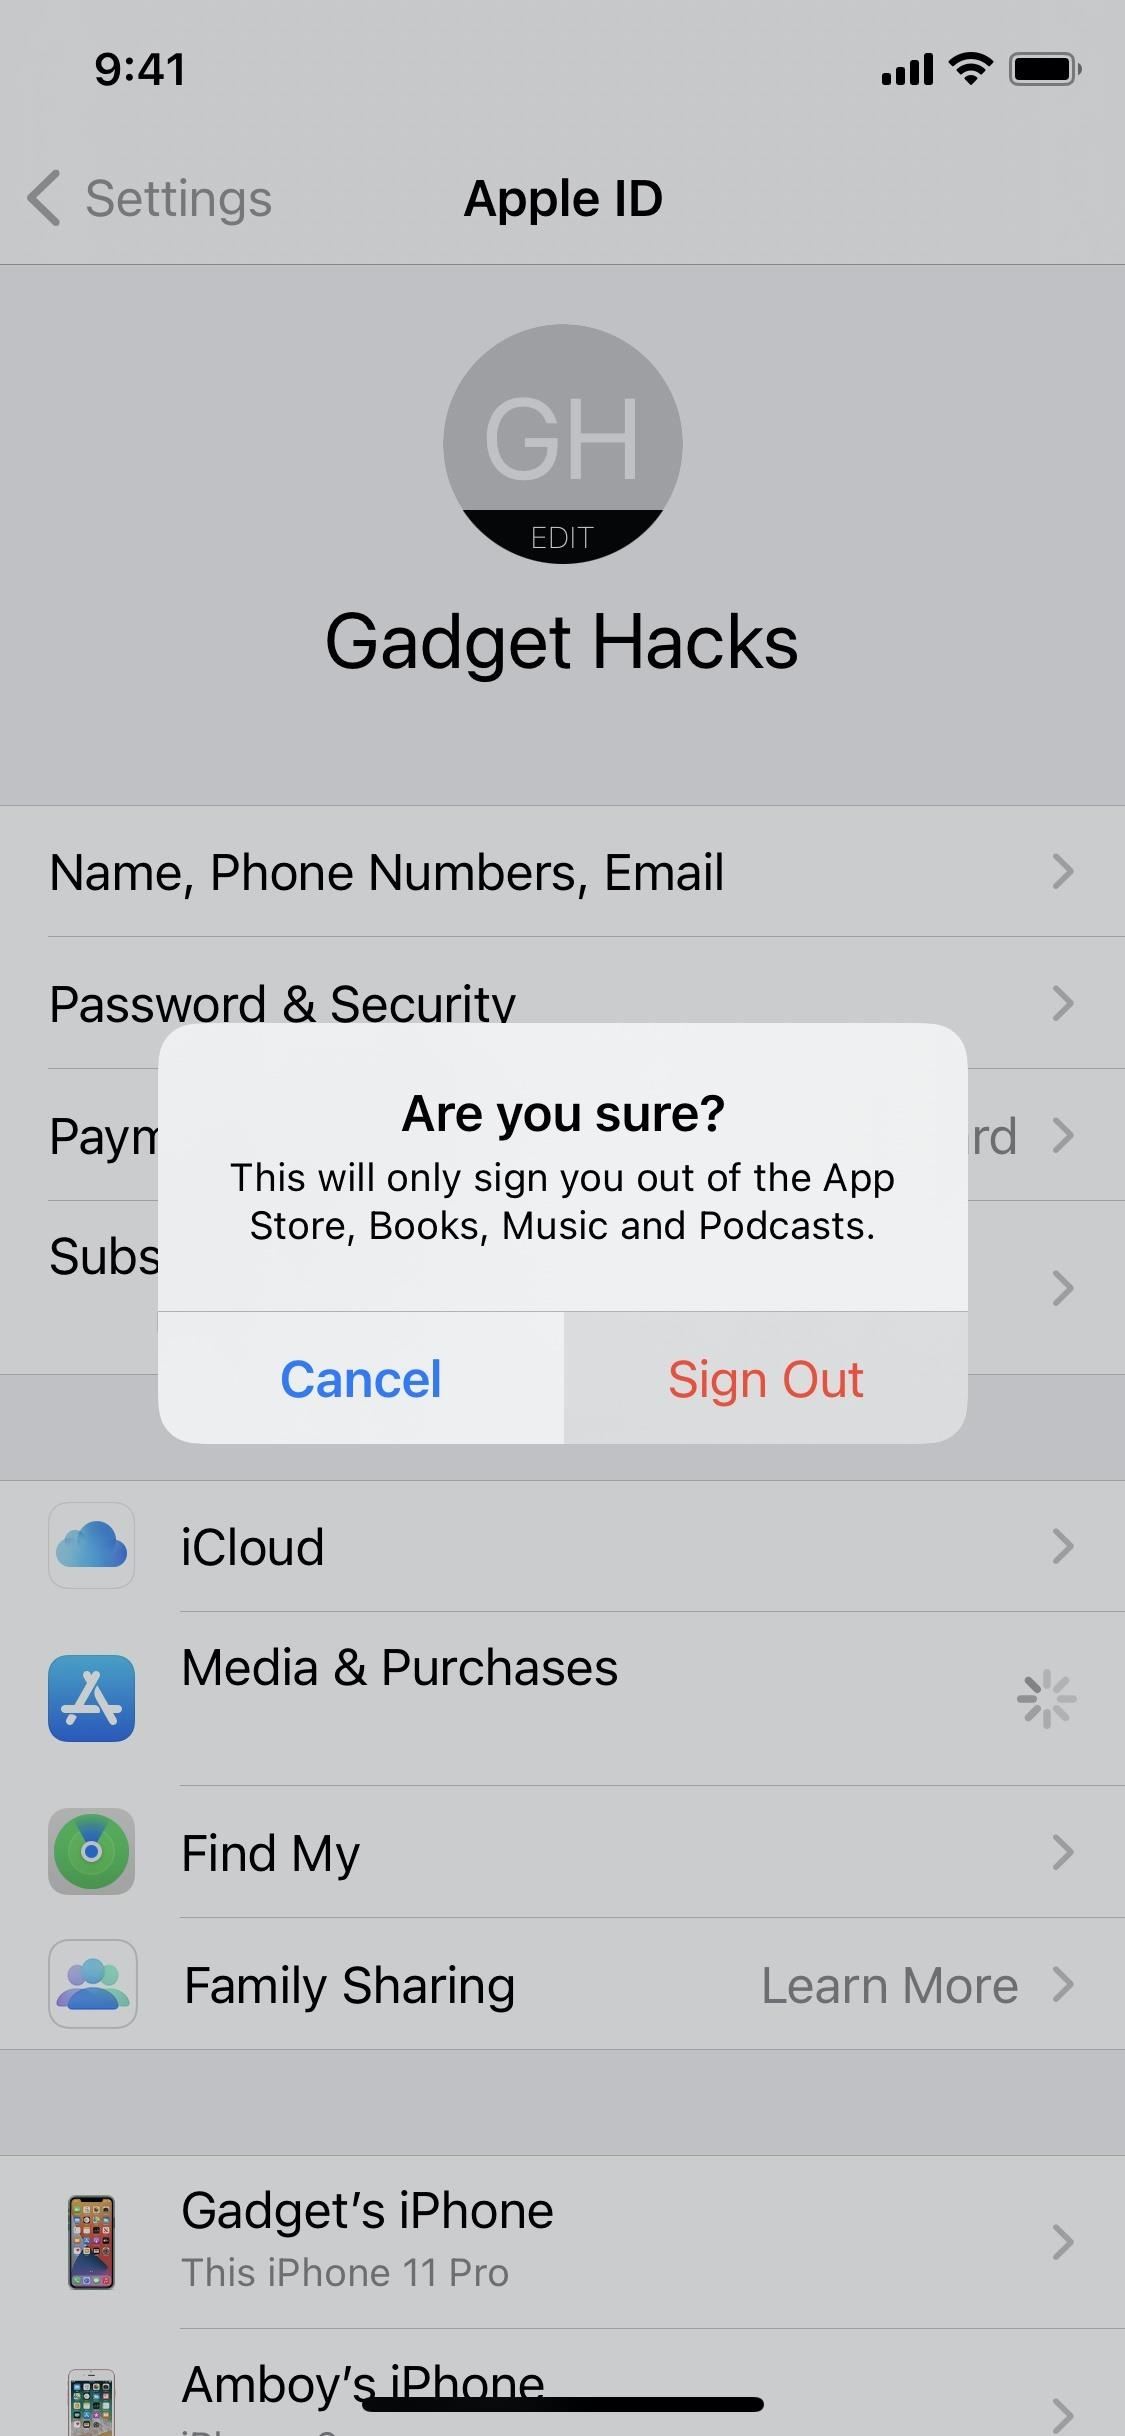 How to Use a Different Apple ID for Apple Music Without Using Family Sharing